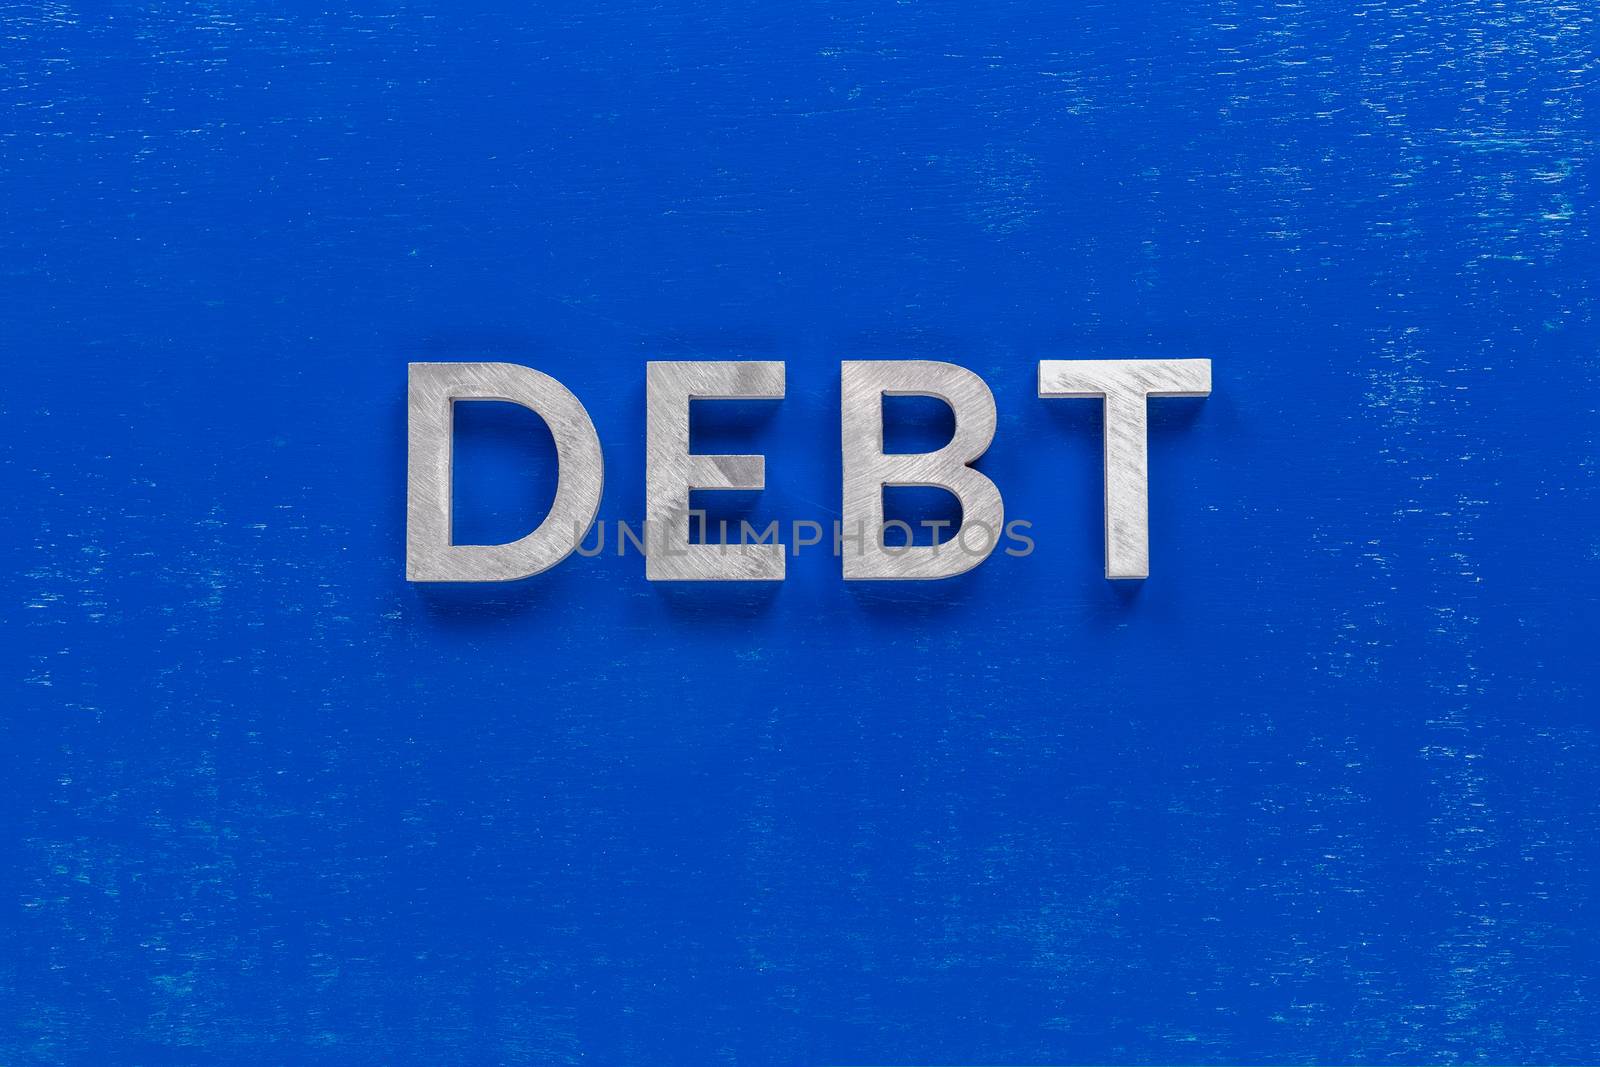 the word debt layed on blue painted board with thick silver metal aphabet characters, centered composition